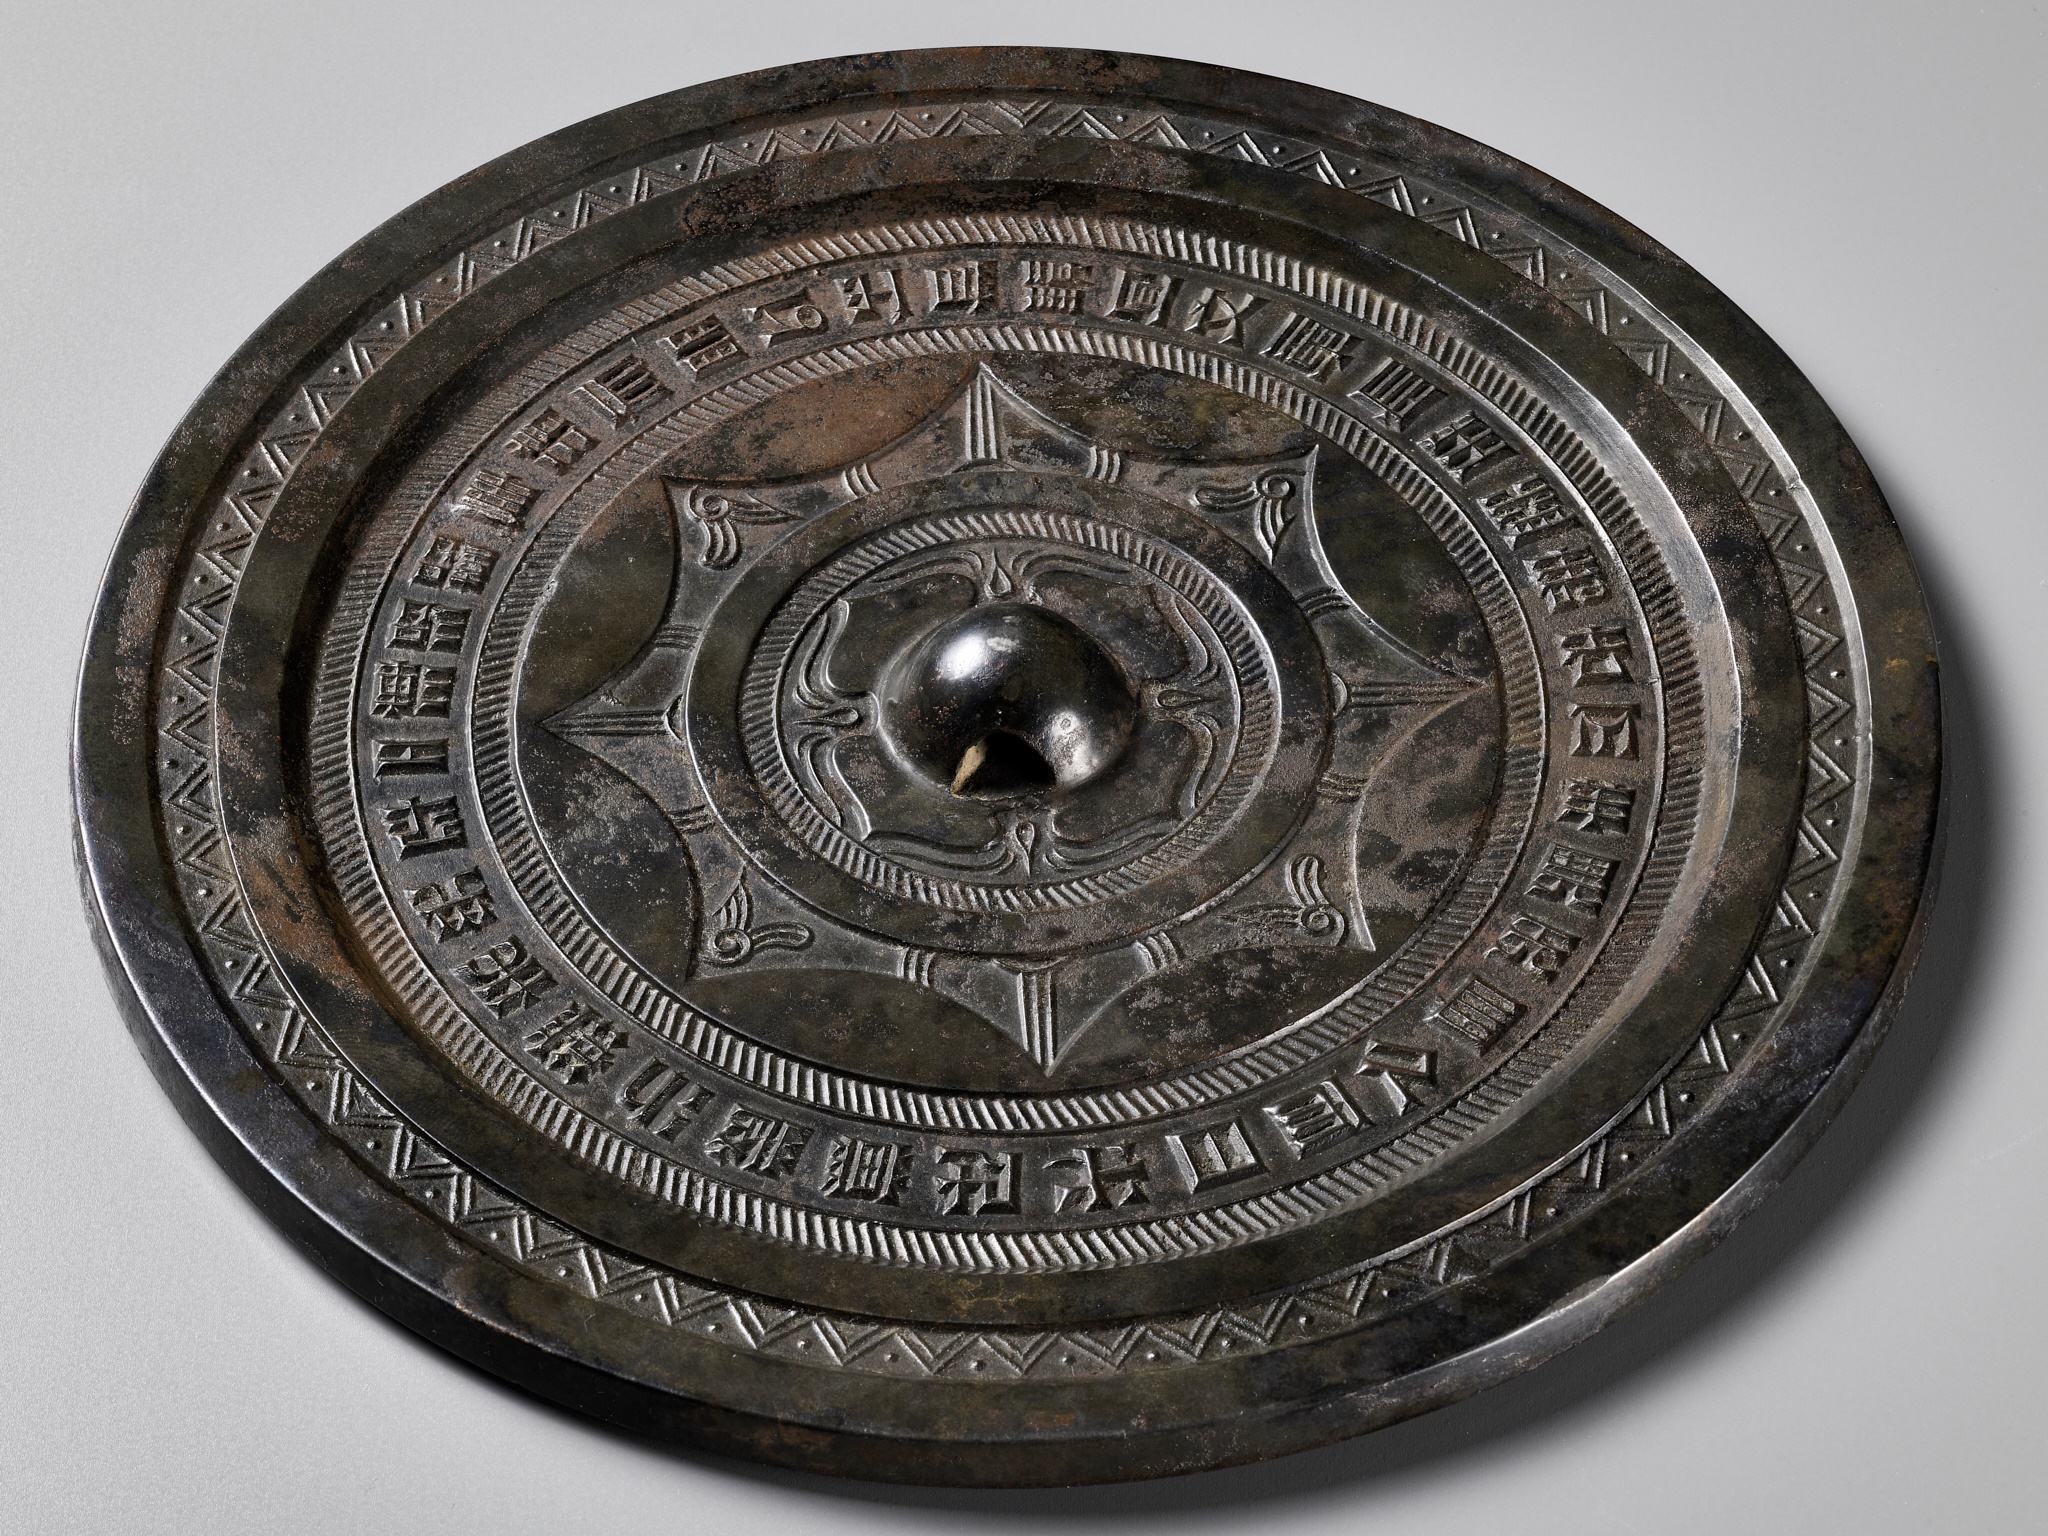 A LARGE BRONZE MIRROR WITH A 37-CHARACTER INSCRIPTION, HAN DYNASTY, CHINA, 206 BC-220 AD - Image 12 of 16